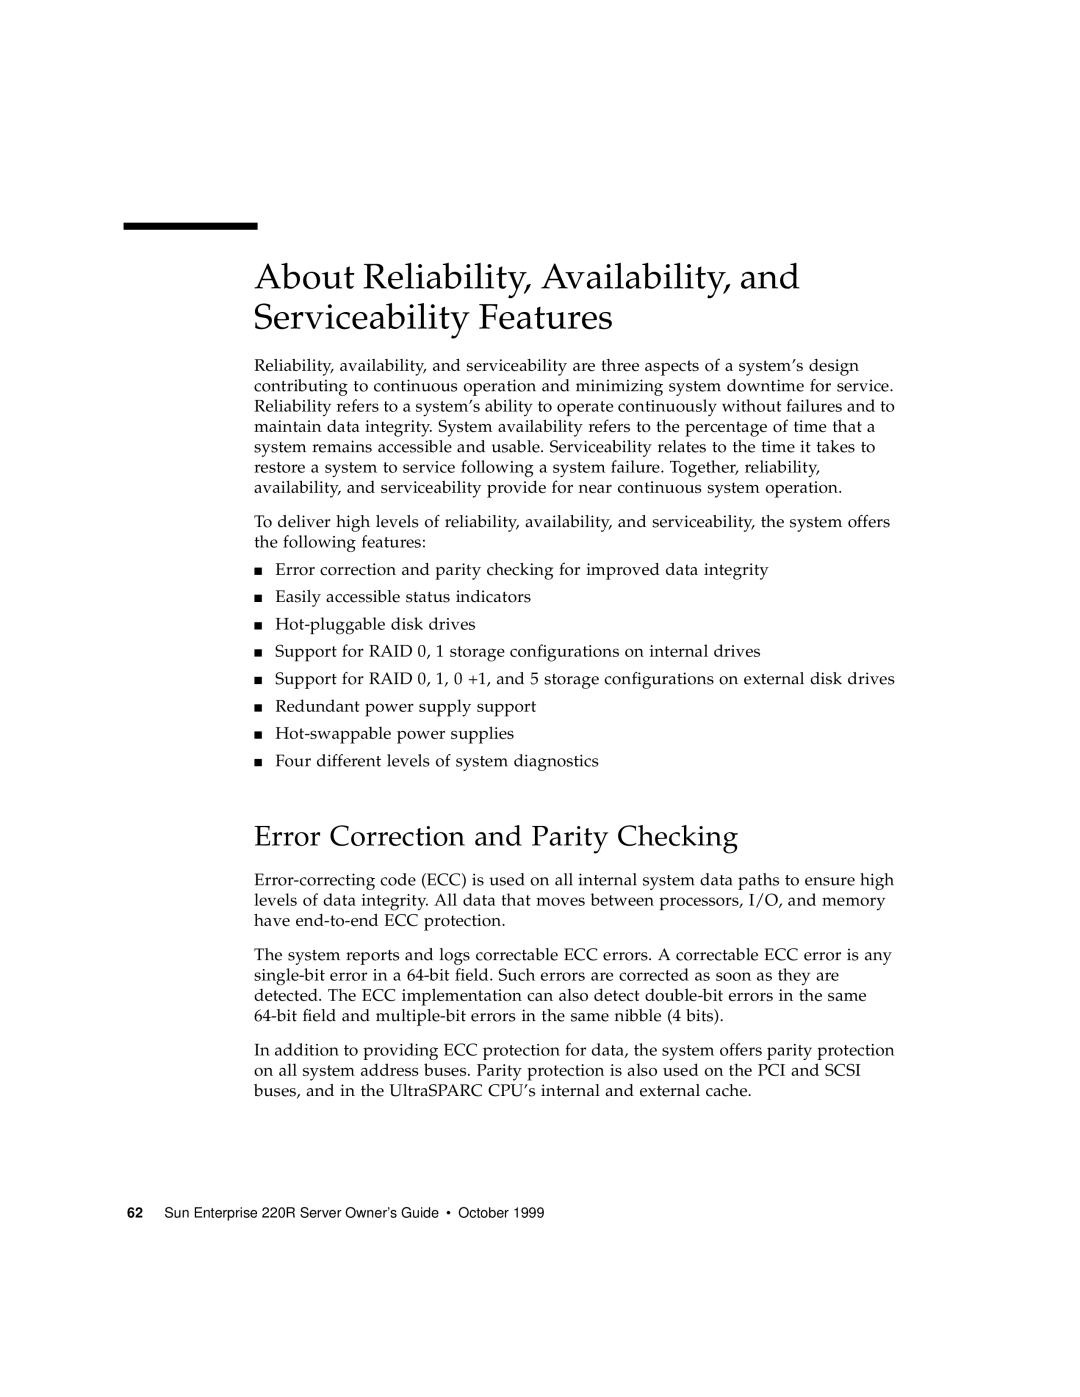 Sun Microsystems 220R About Reliability, Availability, and Serviceability Features, Error Correction and Parity Checking 